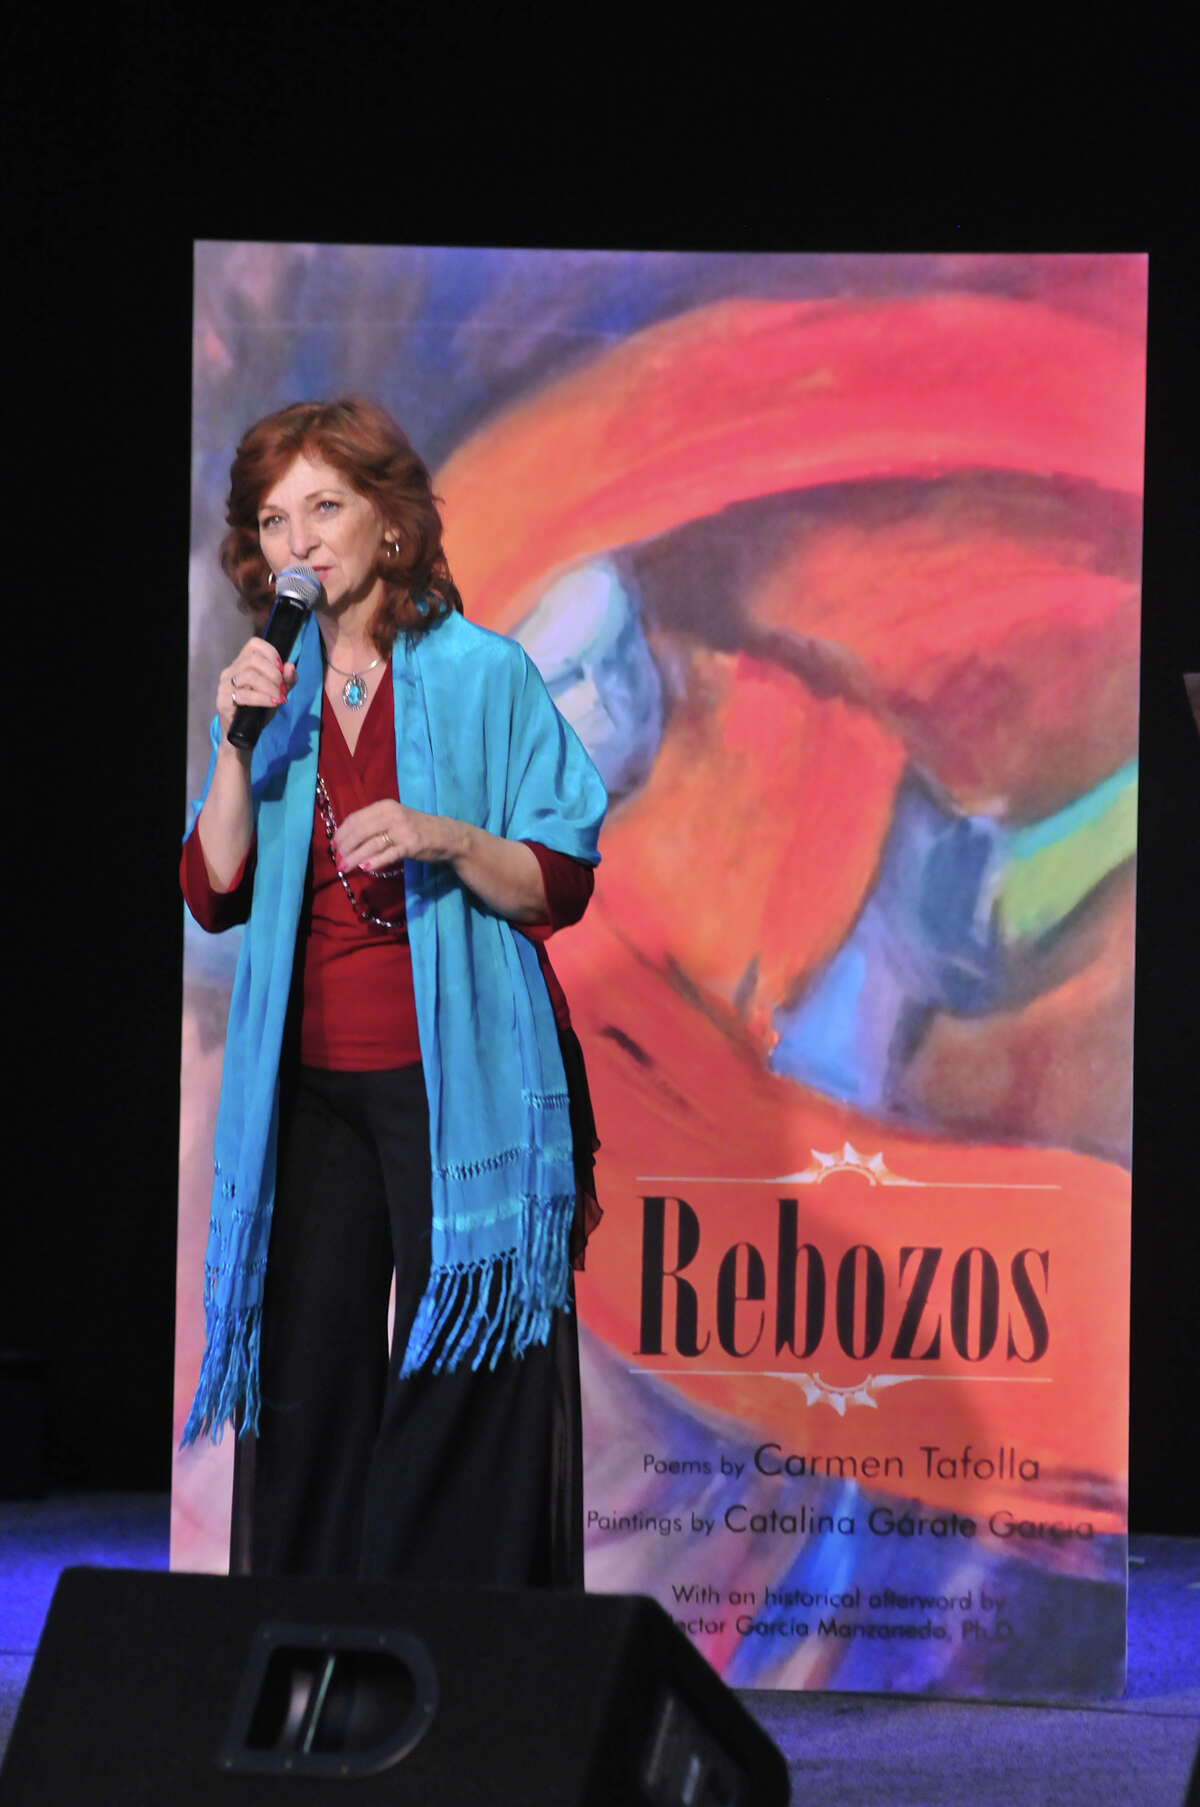 San Antonio author and Poet Laureat Carmen Tafolla speaks in front of an enlargement of her book, Rebozos, during the 9th annual San Antonio Express-News Children's Book Celebration.